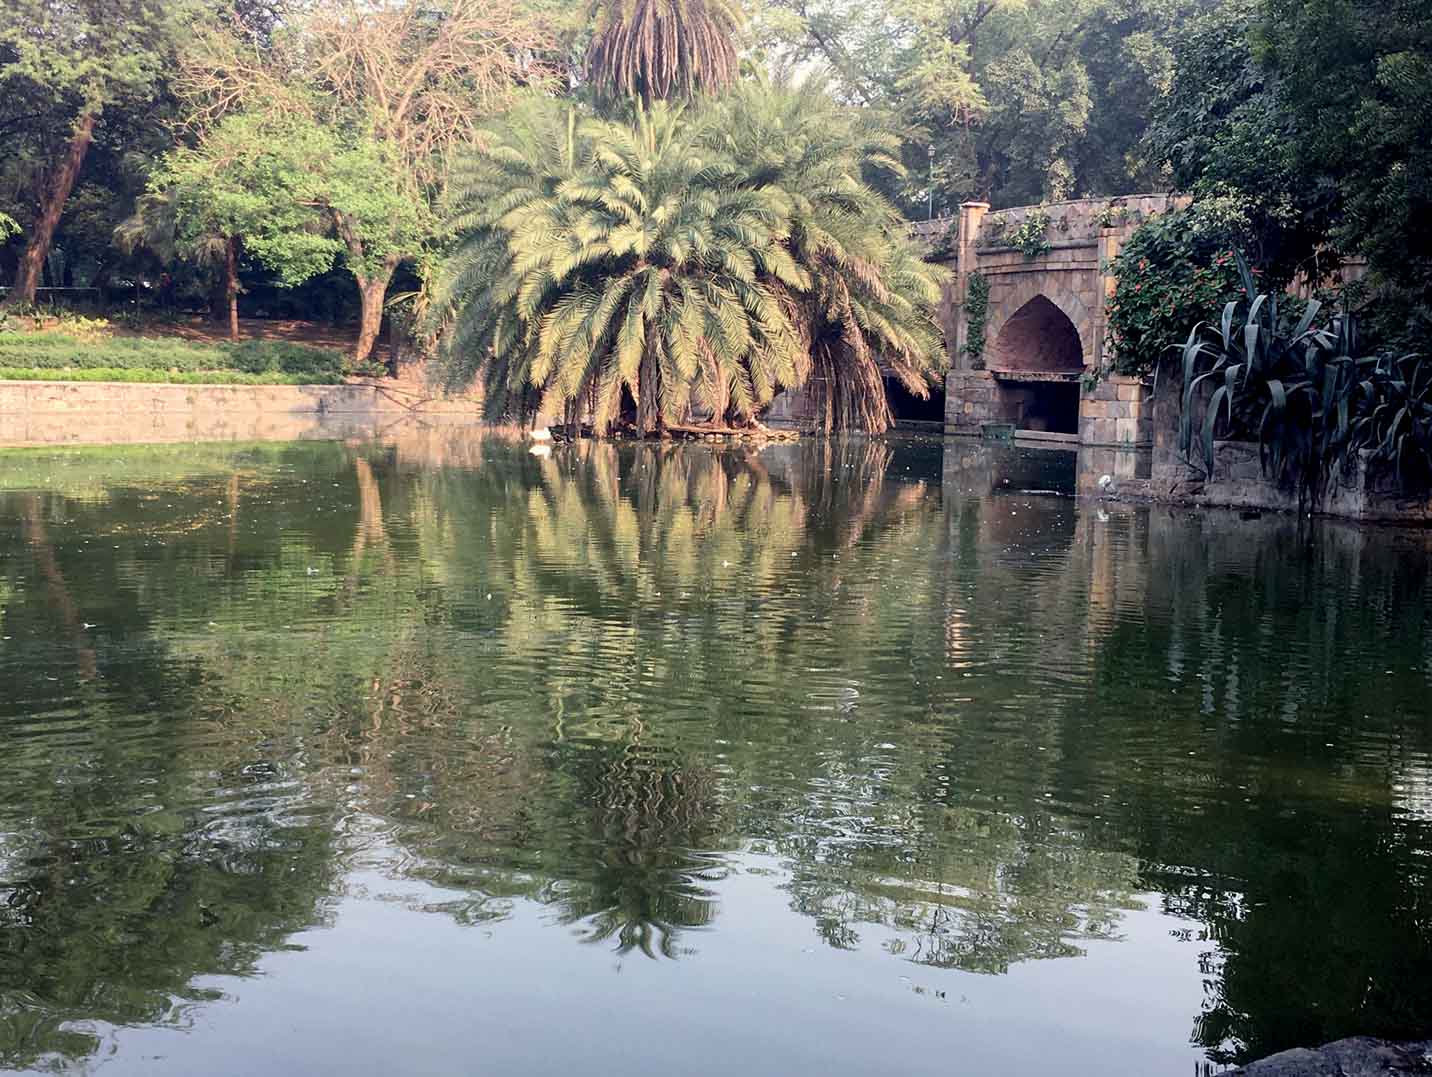 urban-driven-ecology-athpula-bridge-constructed-during-akbar-rule-mughal-dynasty-water-channel-that-joined-river-yamuna-bridge-connected-shahajahanabad-necropolis-lodis-further-agra